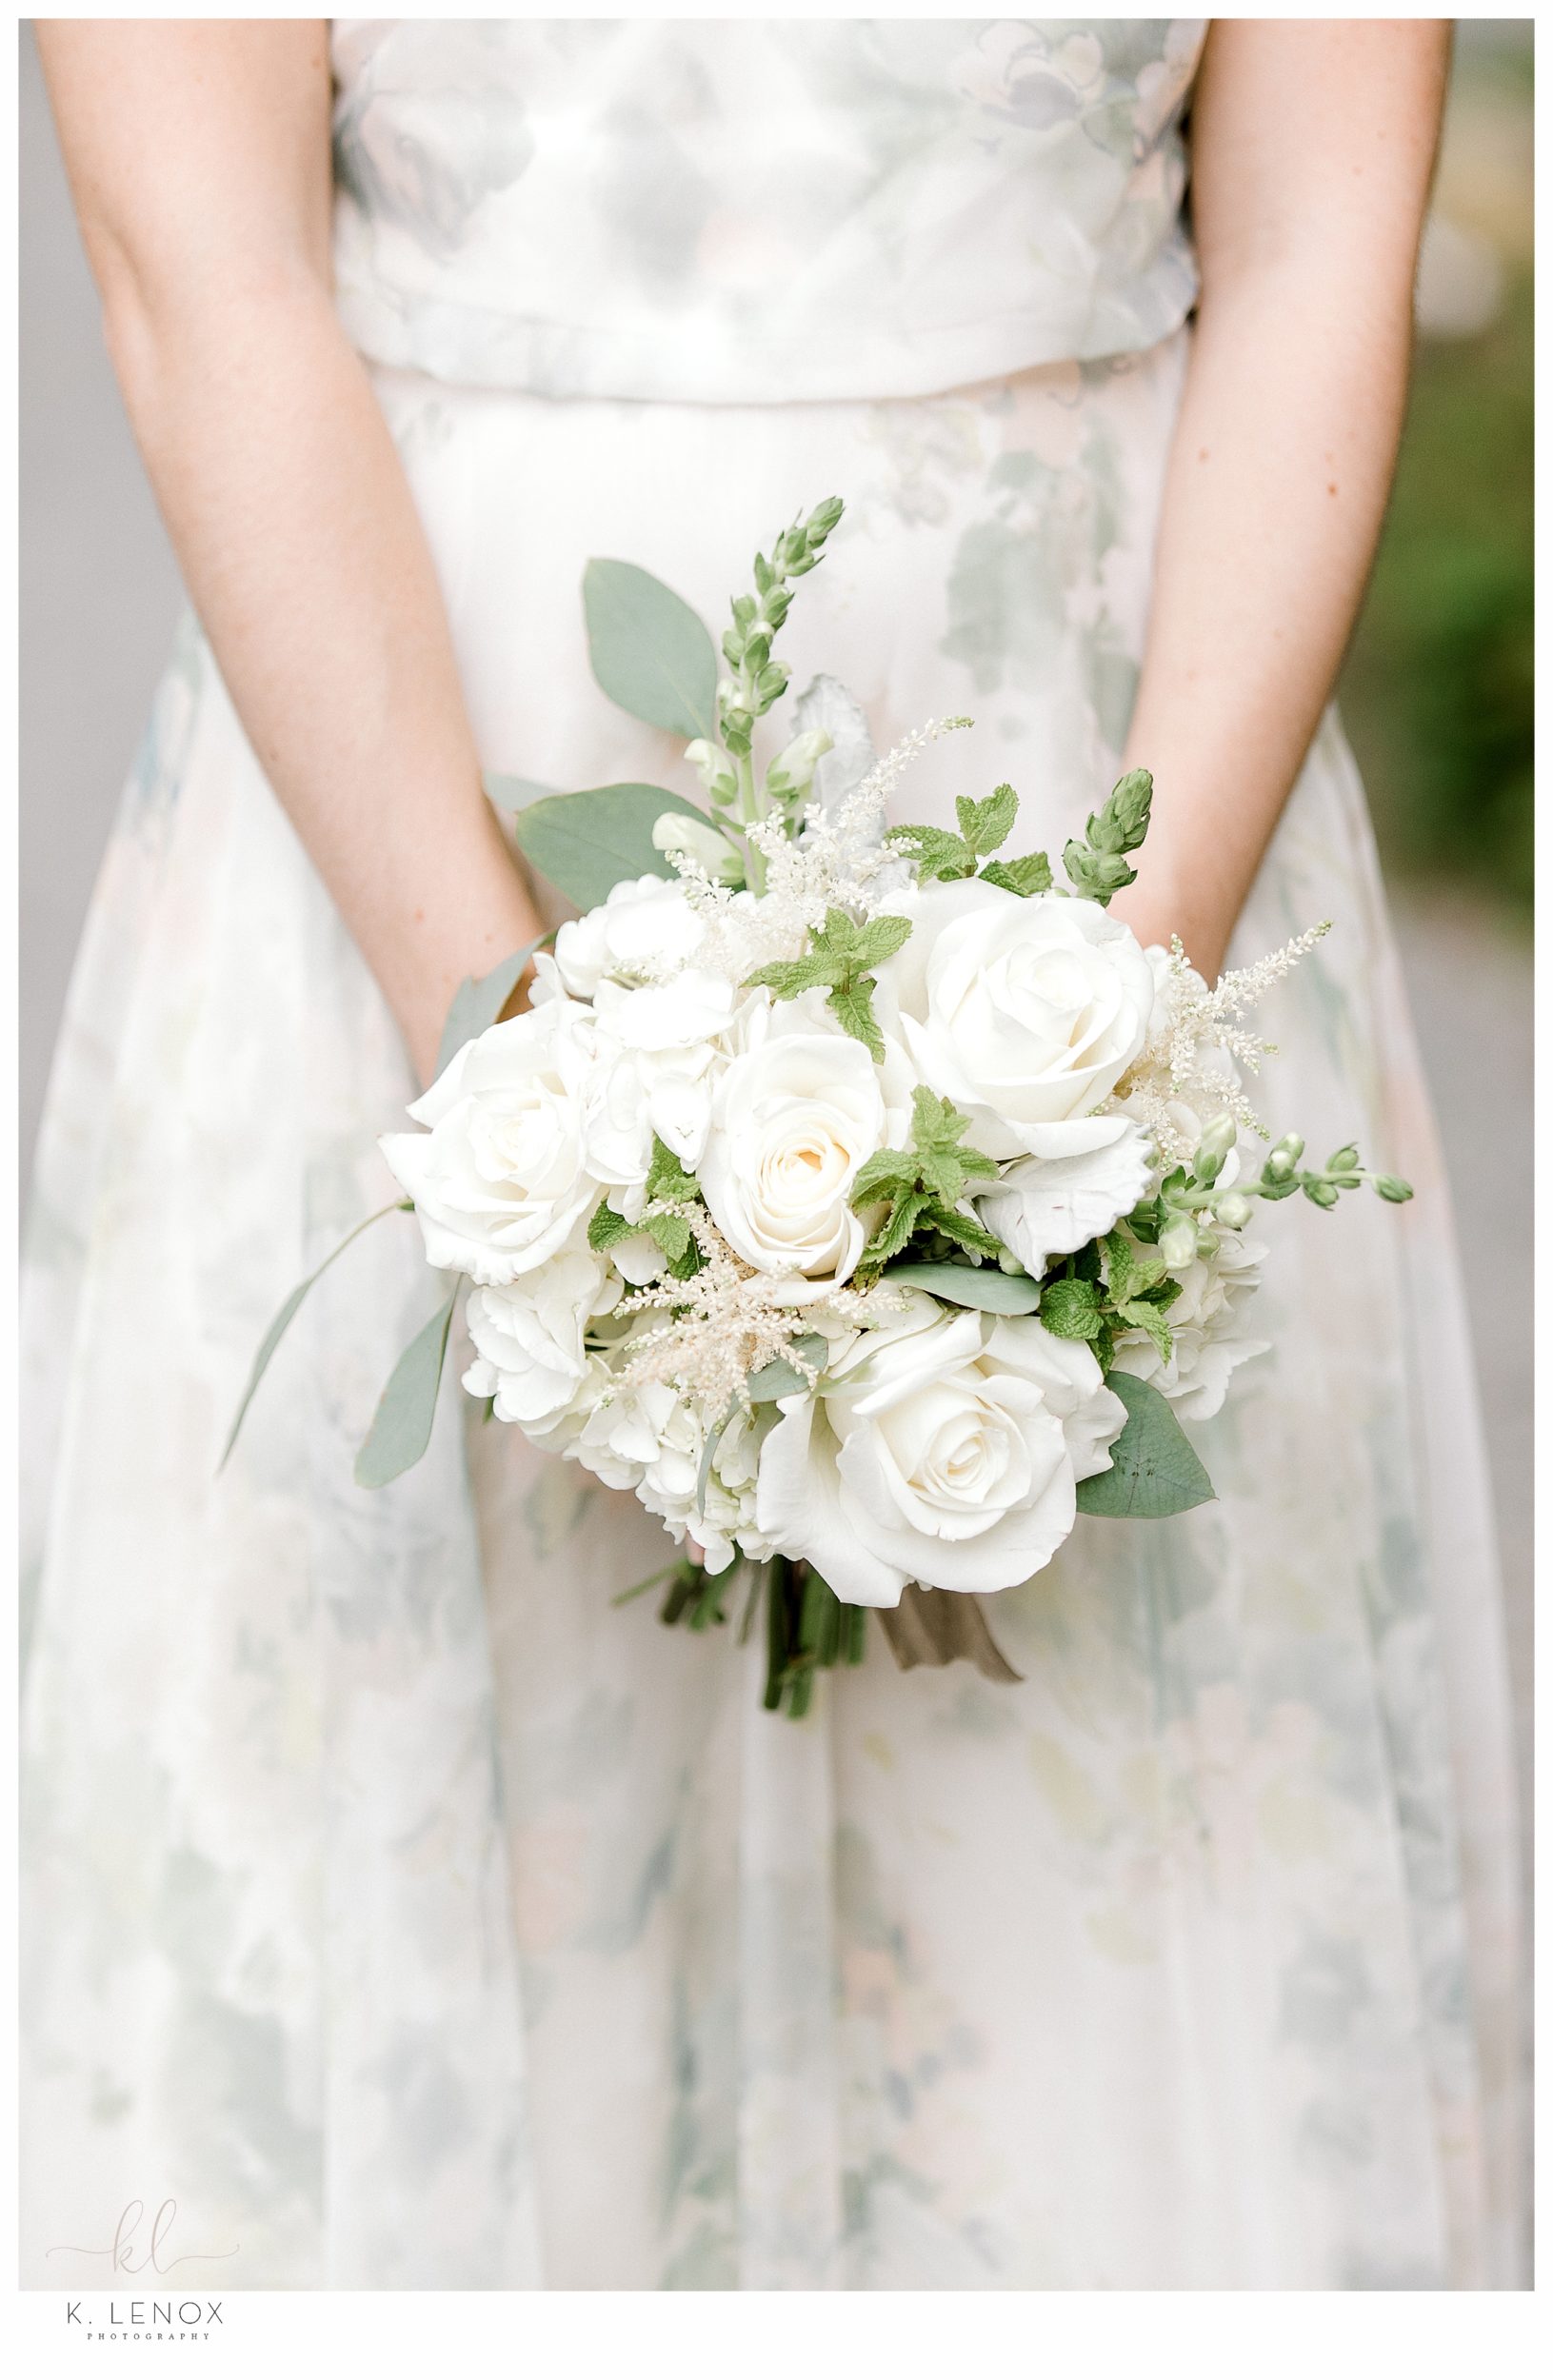 Closeup detail photo of a bridesmaids bouquet showing various white flowers and greenery. 